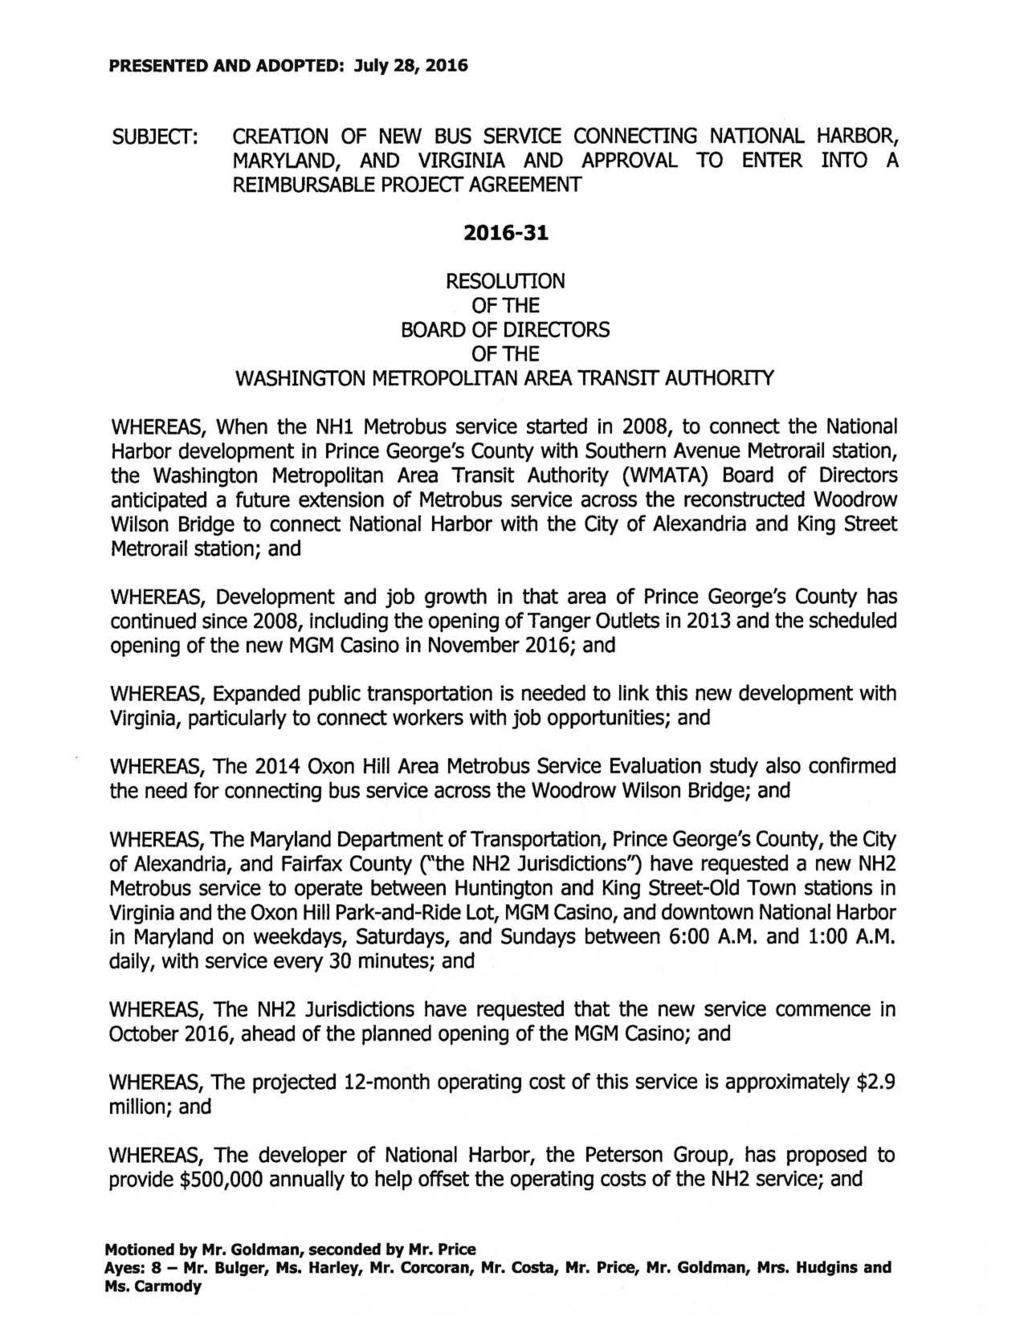 PRESENTED AND ADOPTED: July 28, 2016 SUBJECT: CREATION OF NEW BUS SERVICE CONNECTING NATIONAL HARBOR, MARYLAND, AND VIRGINIA AND APPROVAL TO ENTER INTO A REIMBURSABLE PROJECT AGREEMENT 2016-31